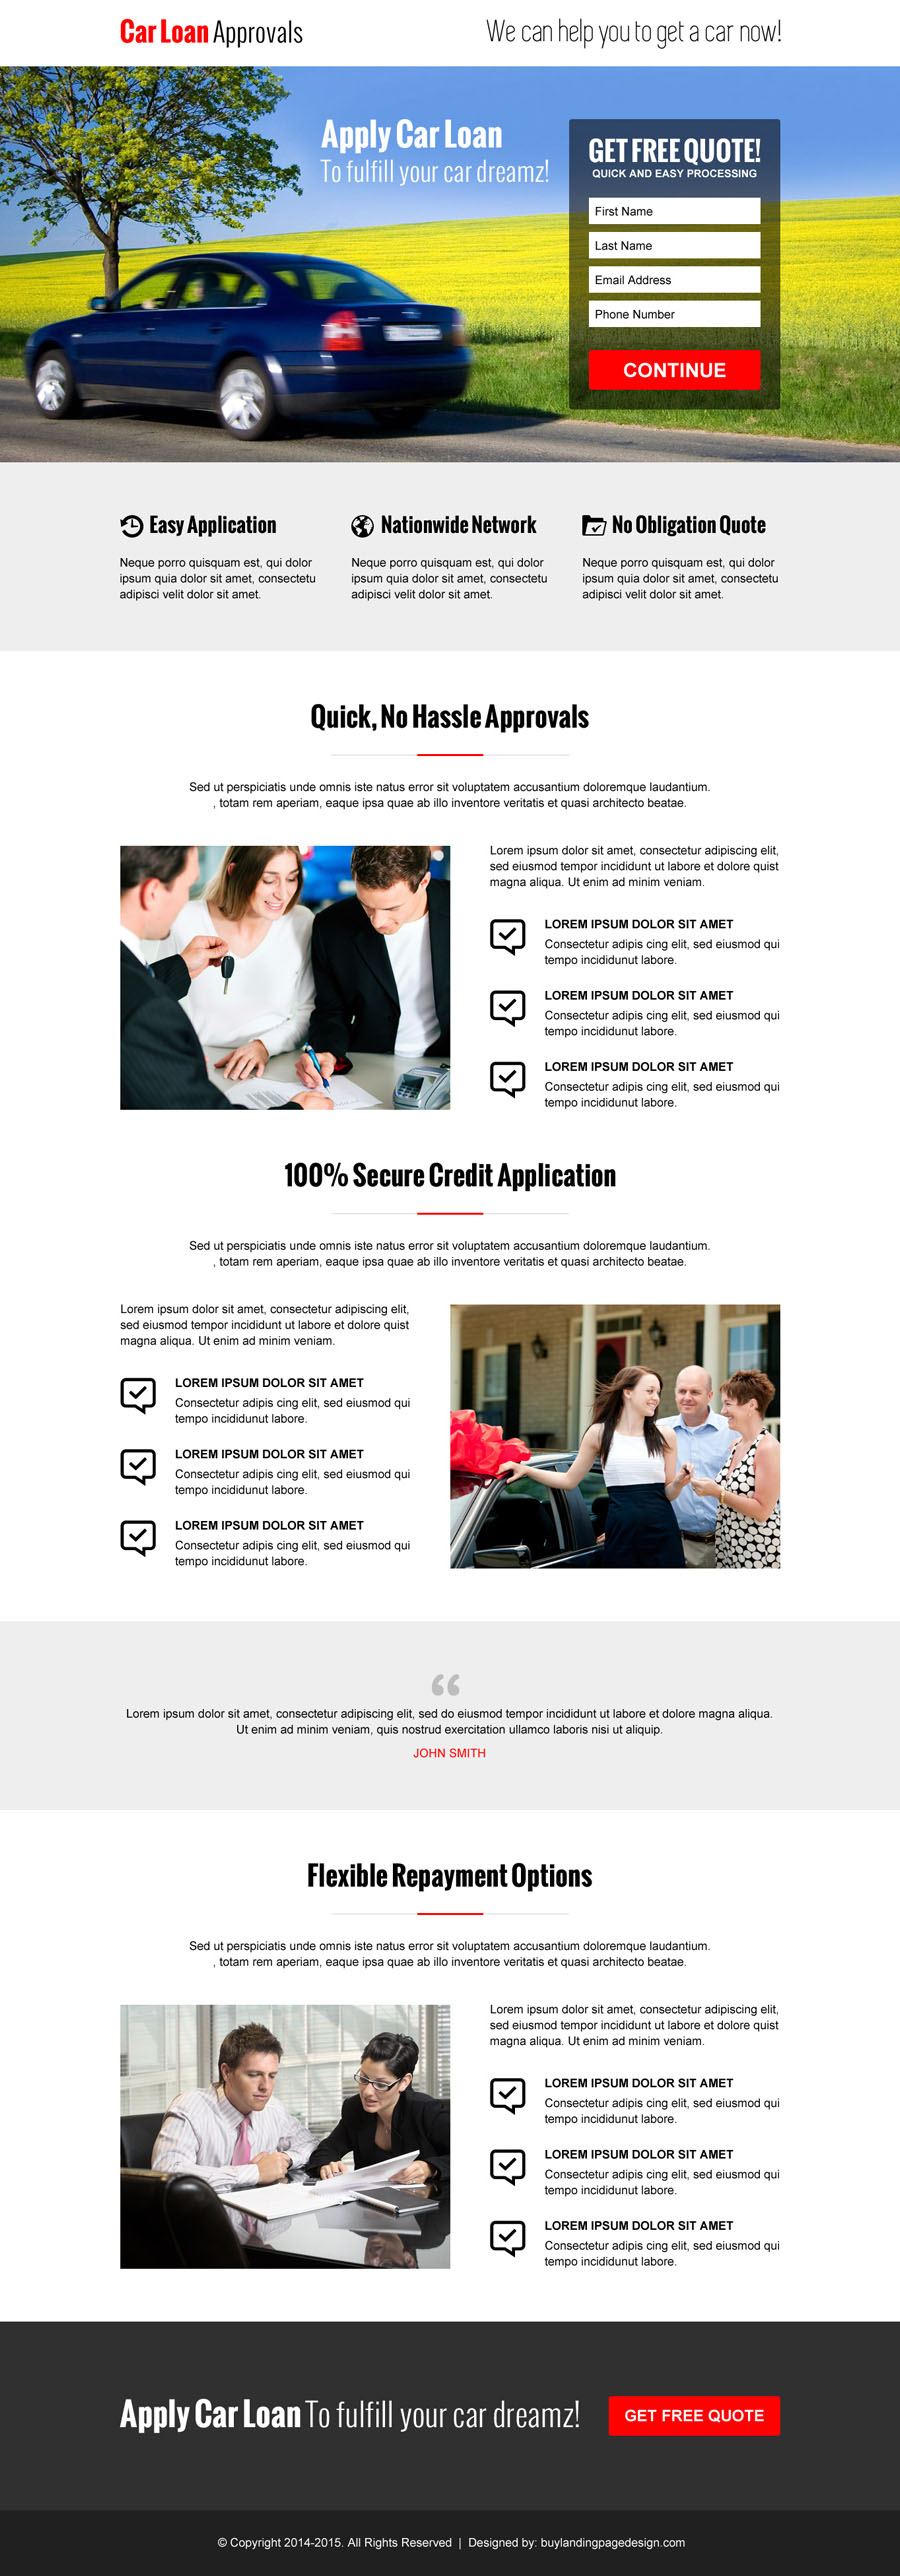 apply-for-car-loan-approvals-lead-capture-landing-page-design-template-014